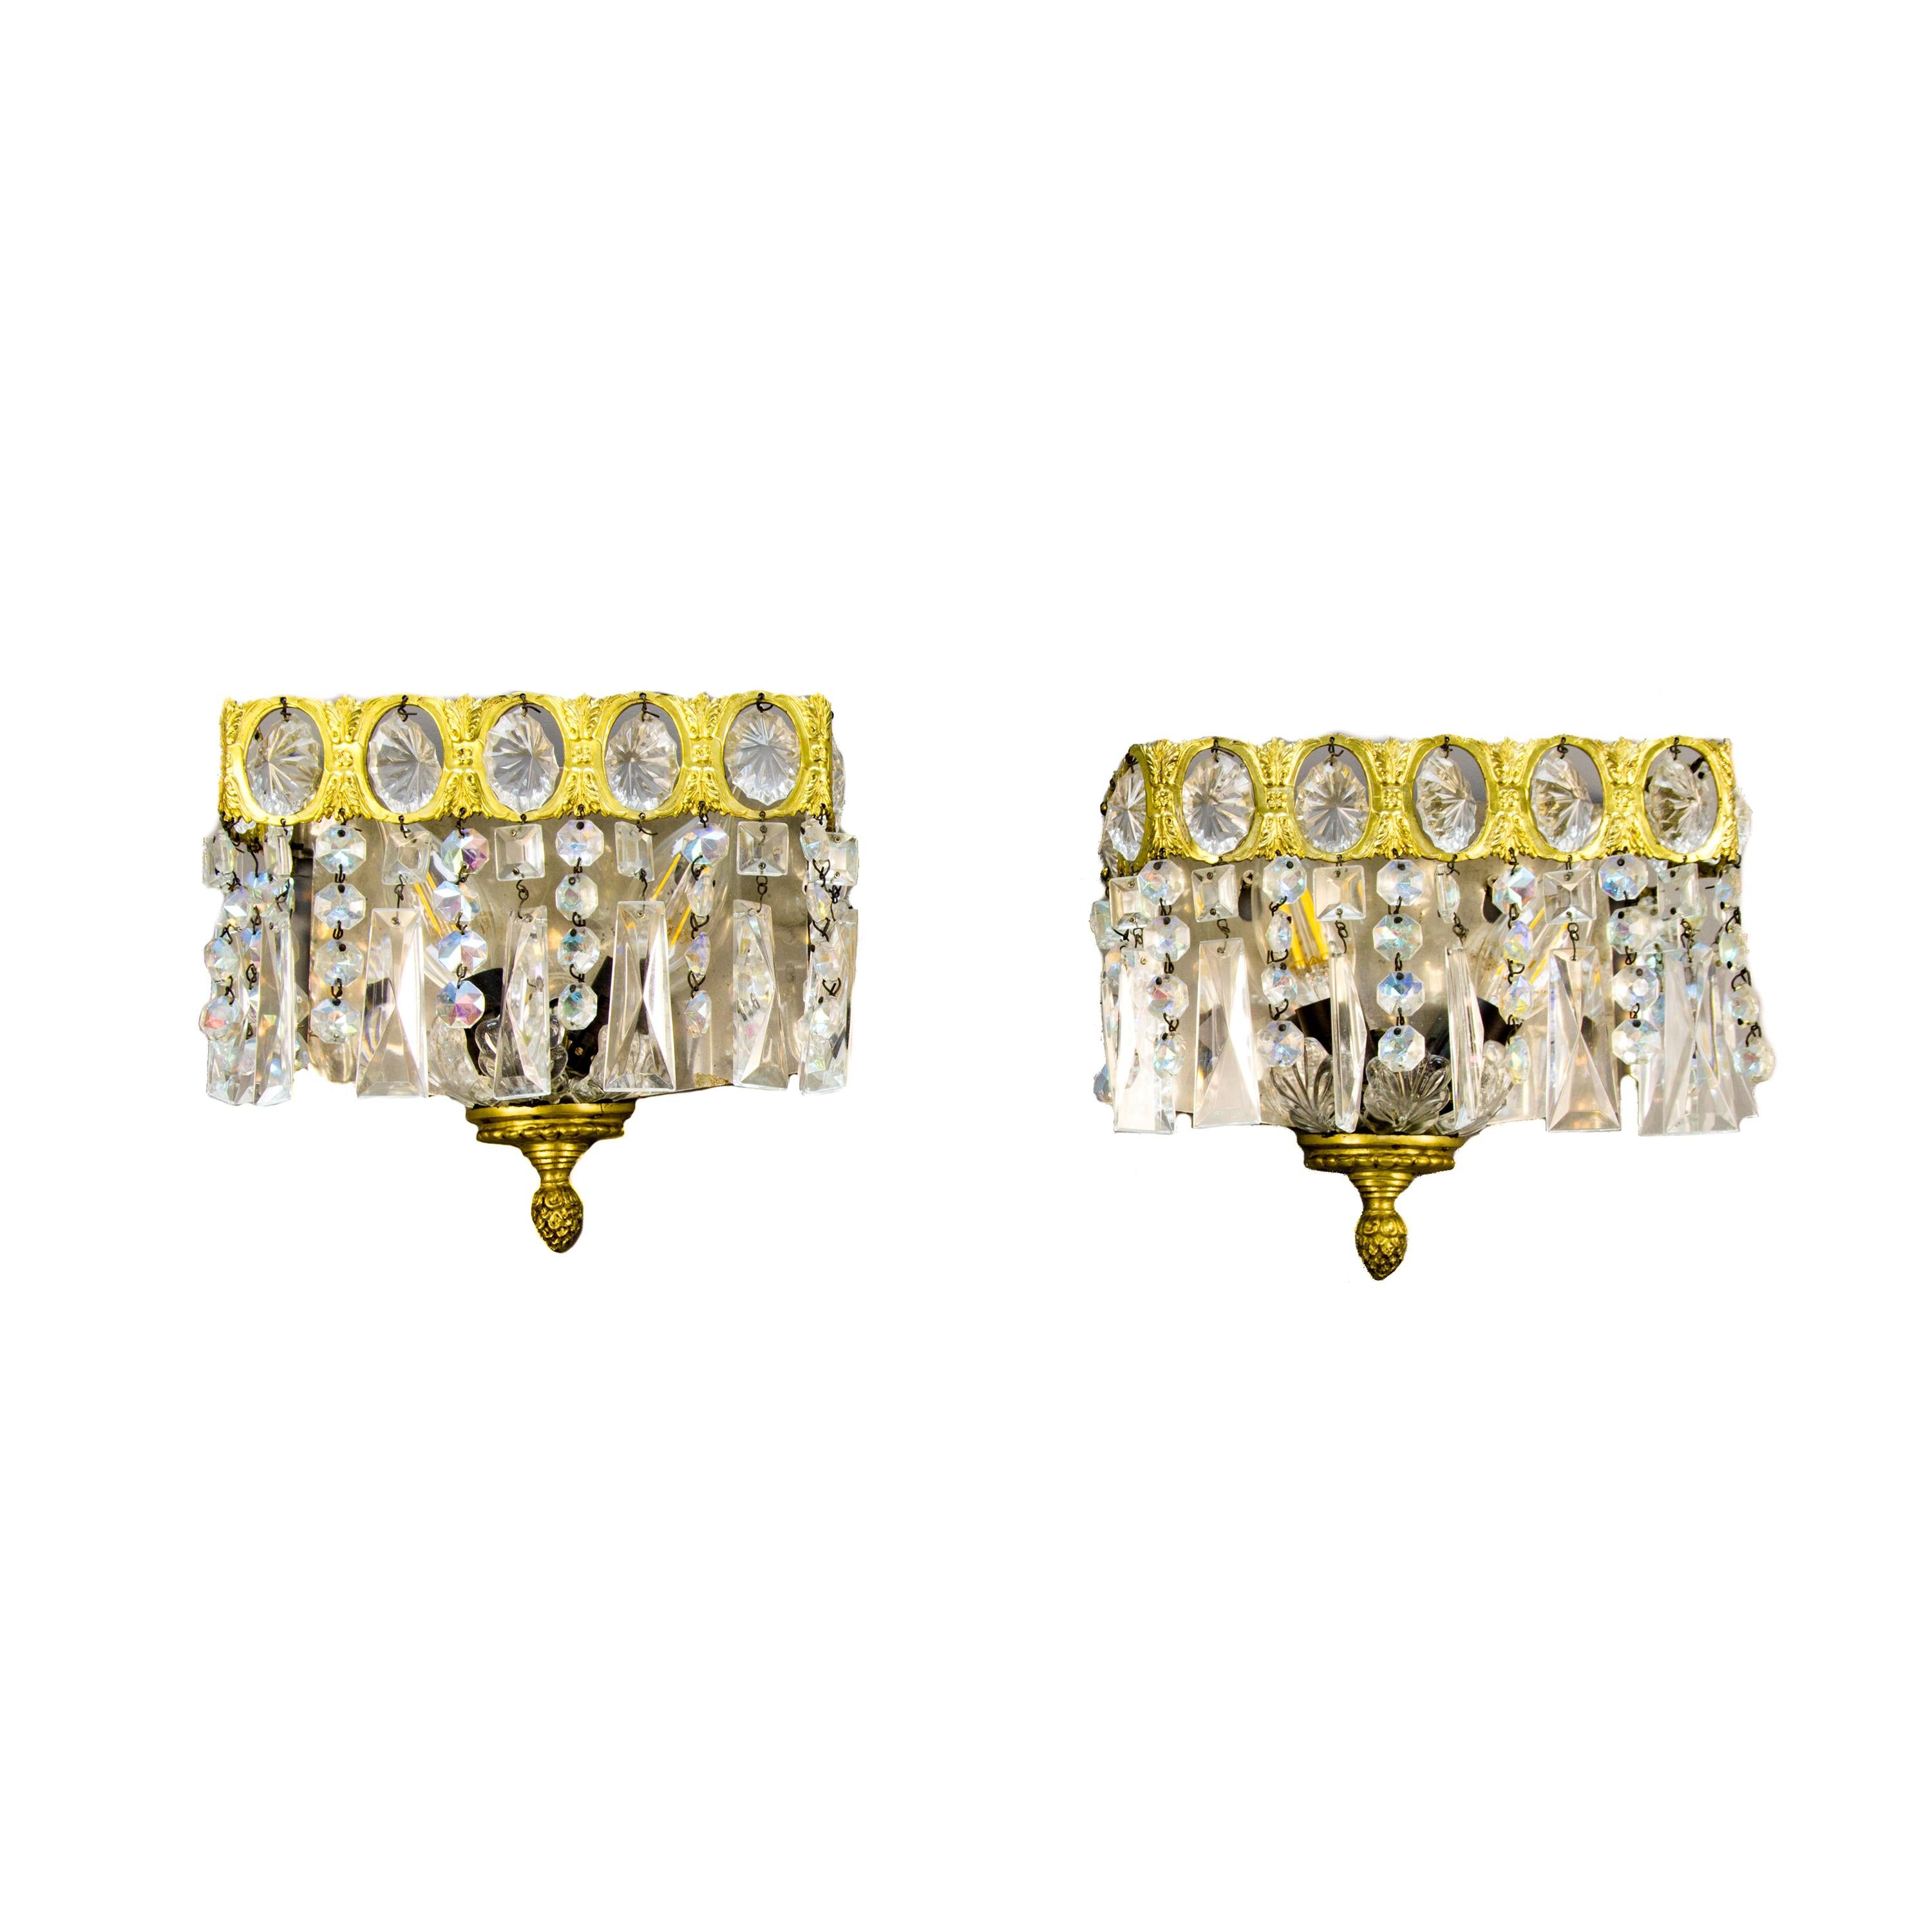 Pair of Italian Vintage Crystal Glass and Brass Sconces